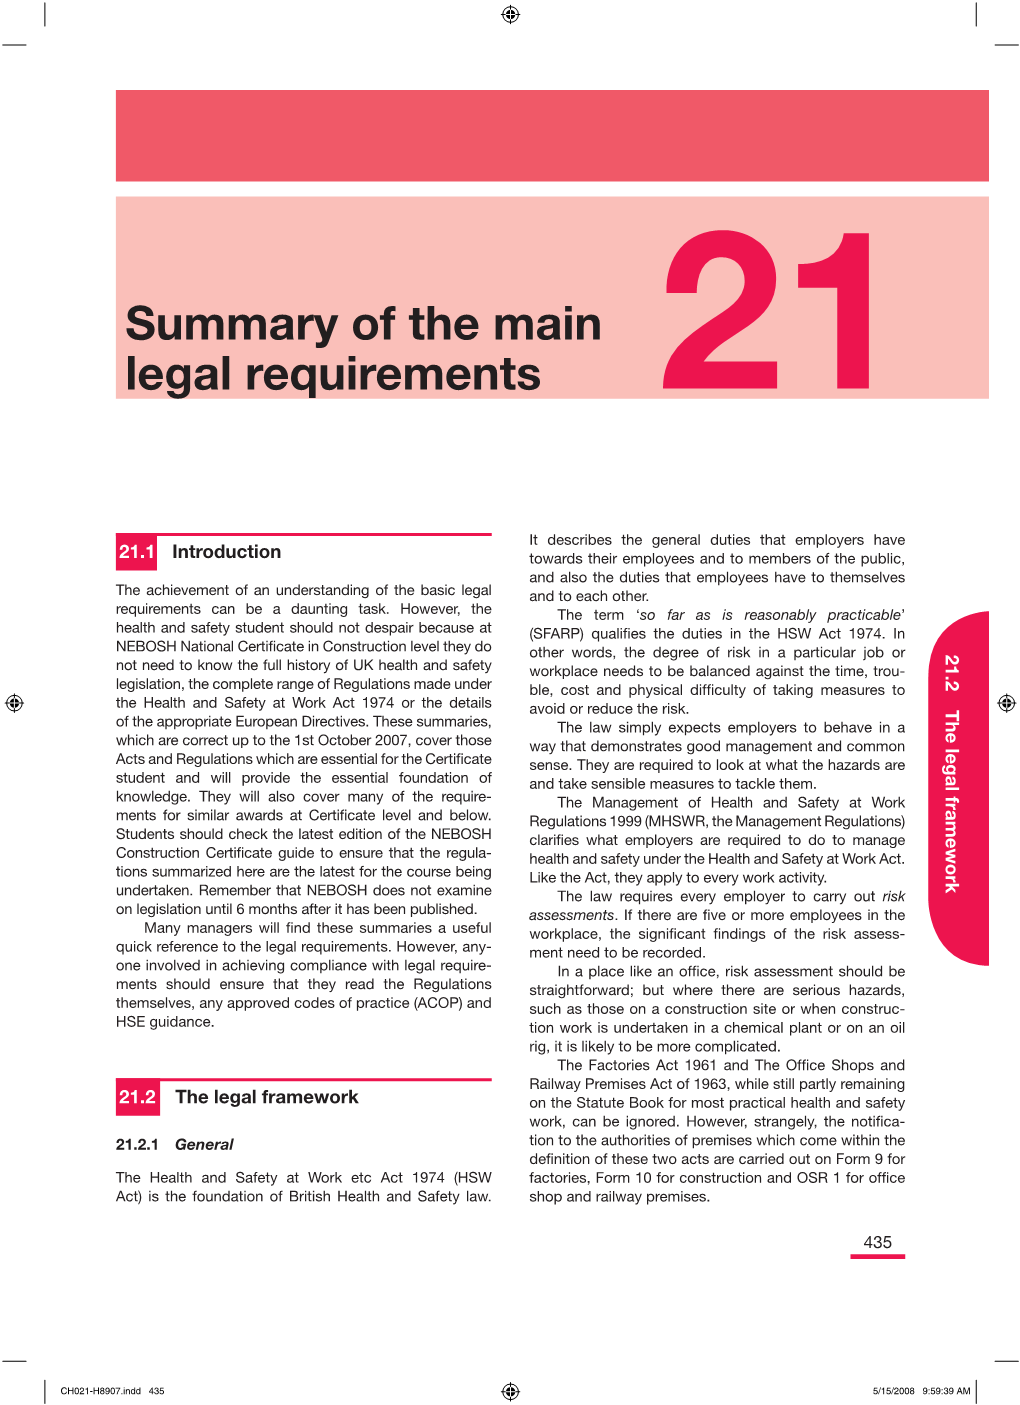 Summary of the Main Legal Requirements 21